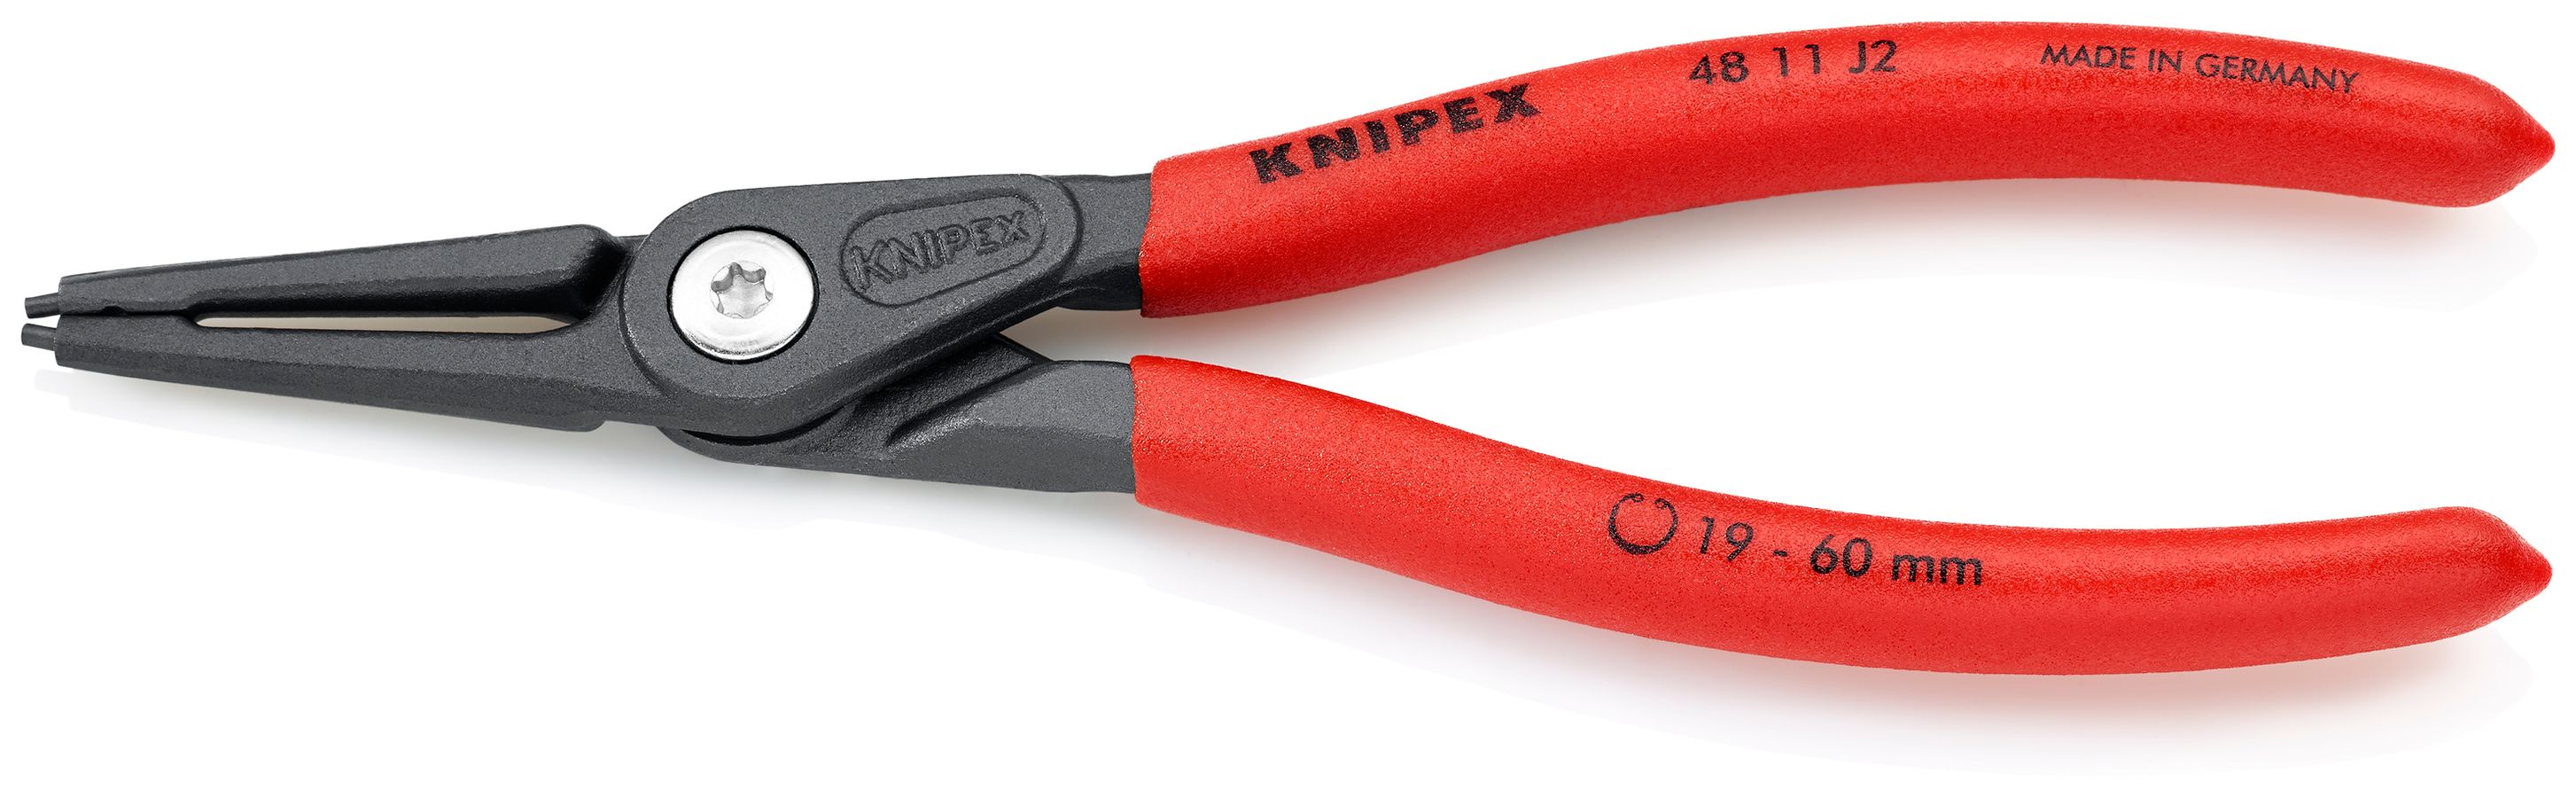 Internal Precision Snap Ring Pliers | KNIPEX Tools